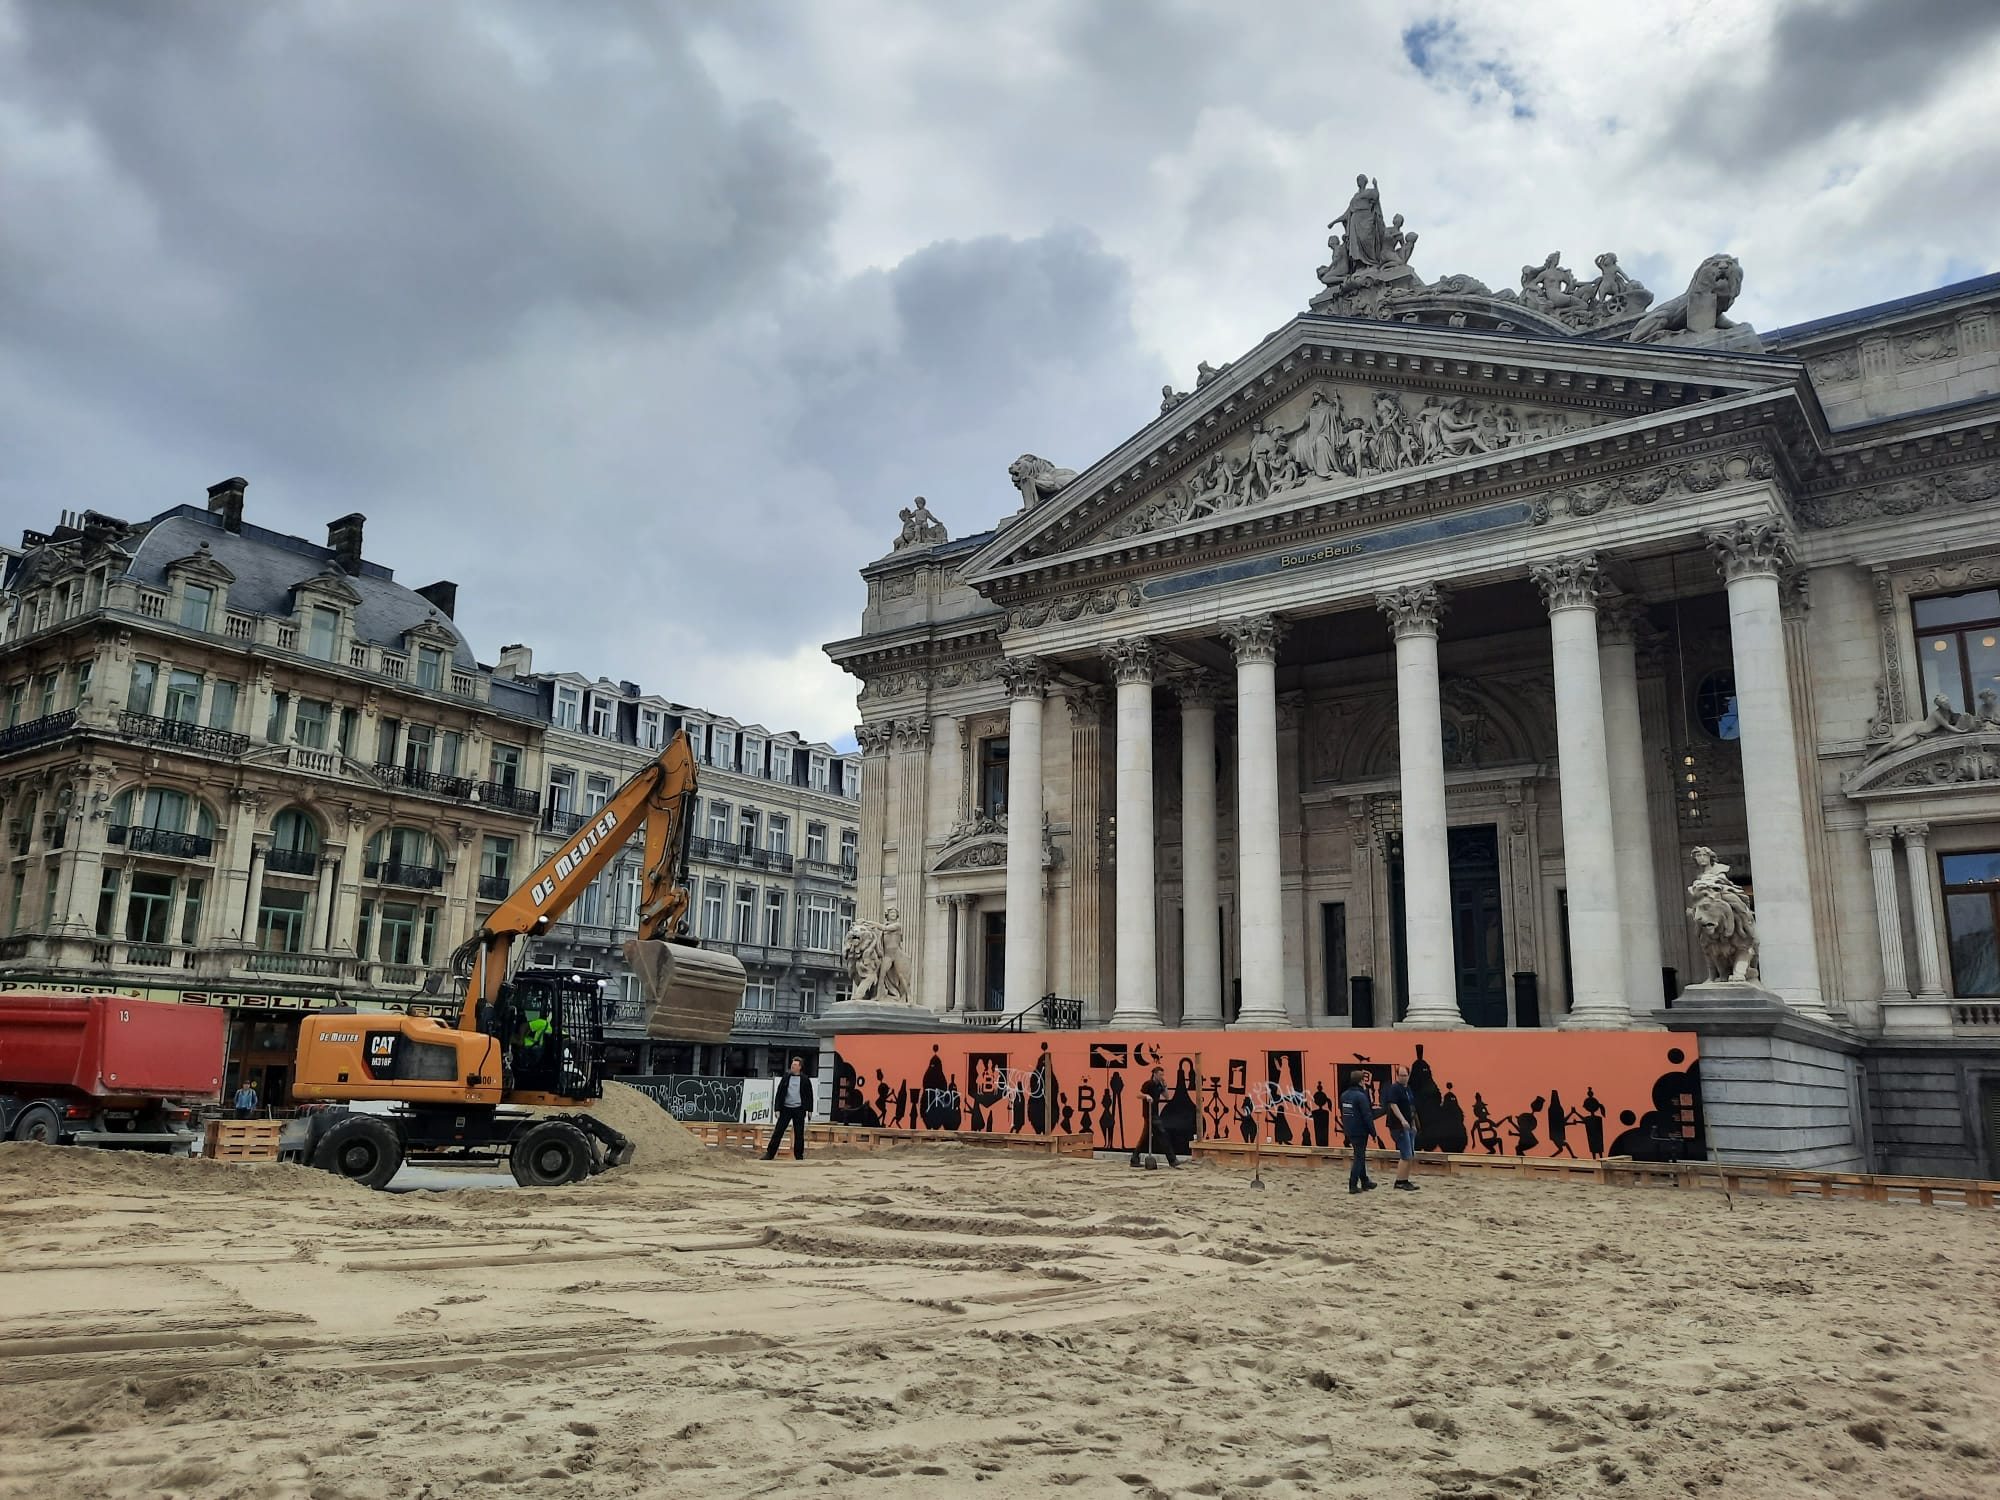 Two beaches open in central Brussels this week